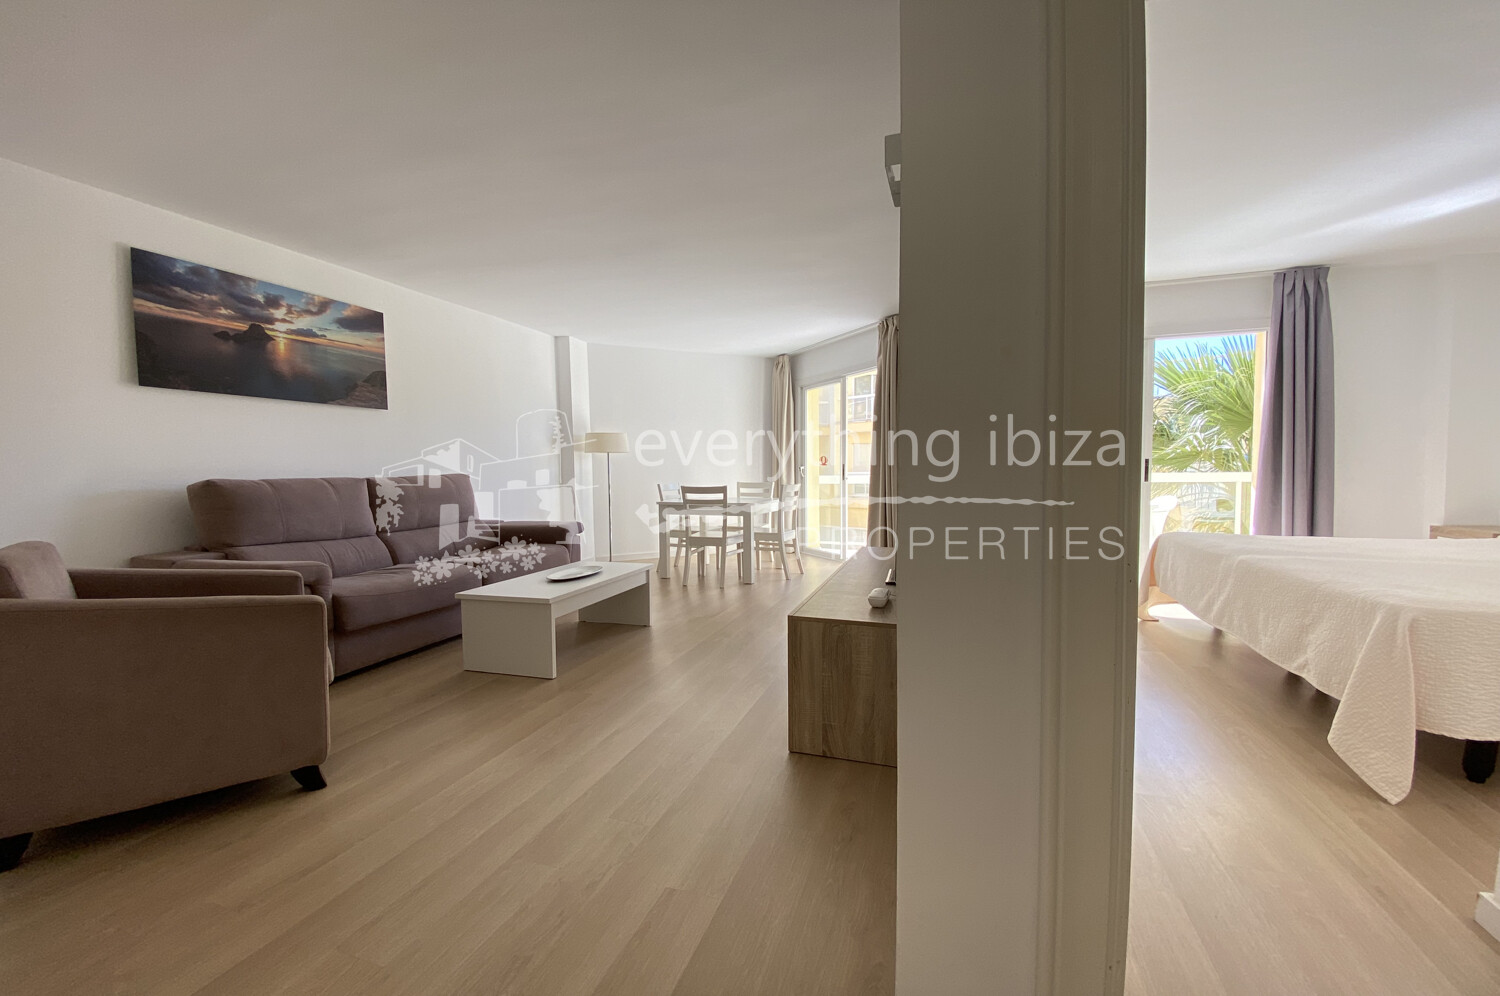 Modern 1 Bed Apartment Close to the Coastline, Sea & Beaches, ref. 1493, for sale in Ibiza by everything ibiza Properties